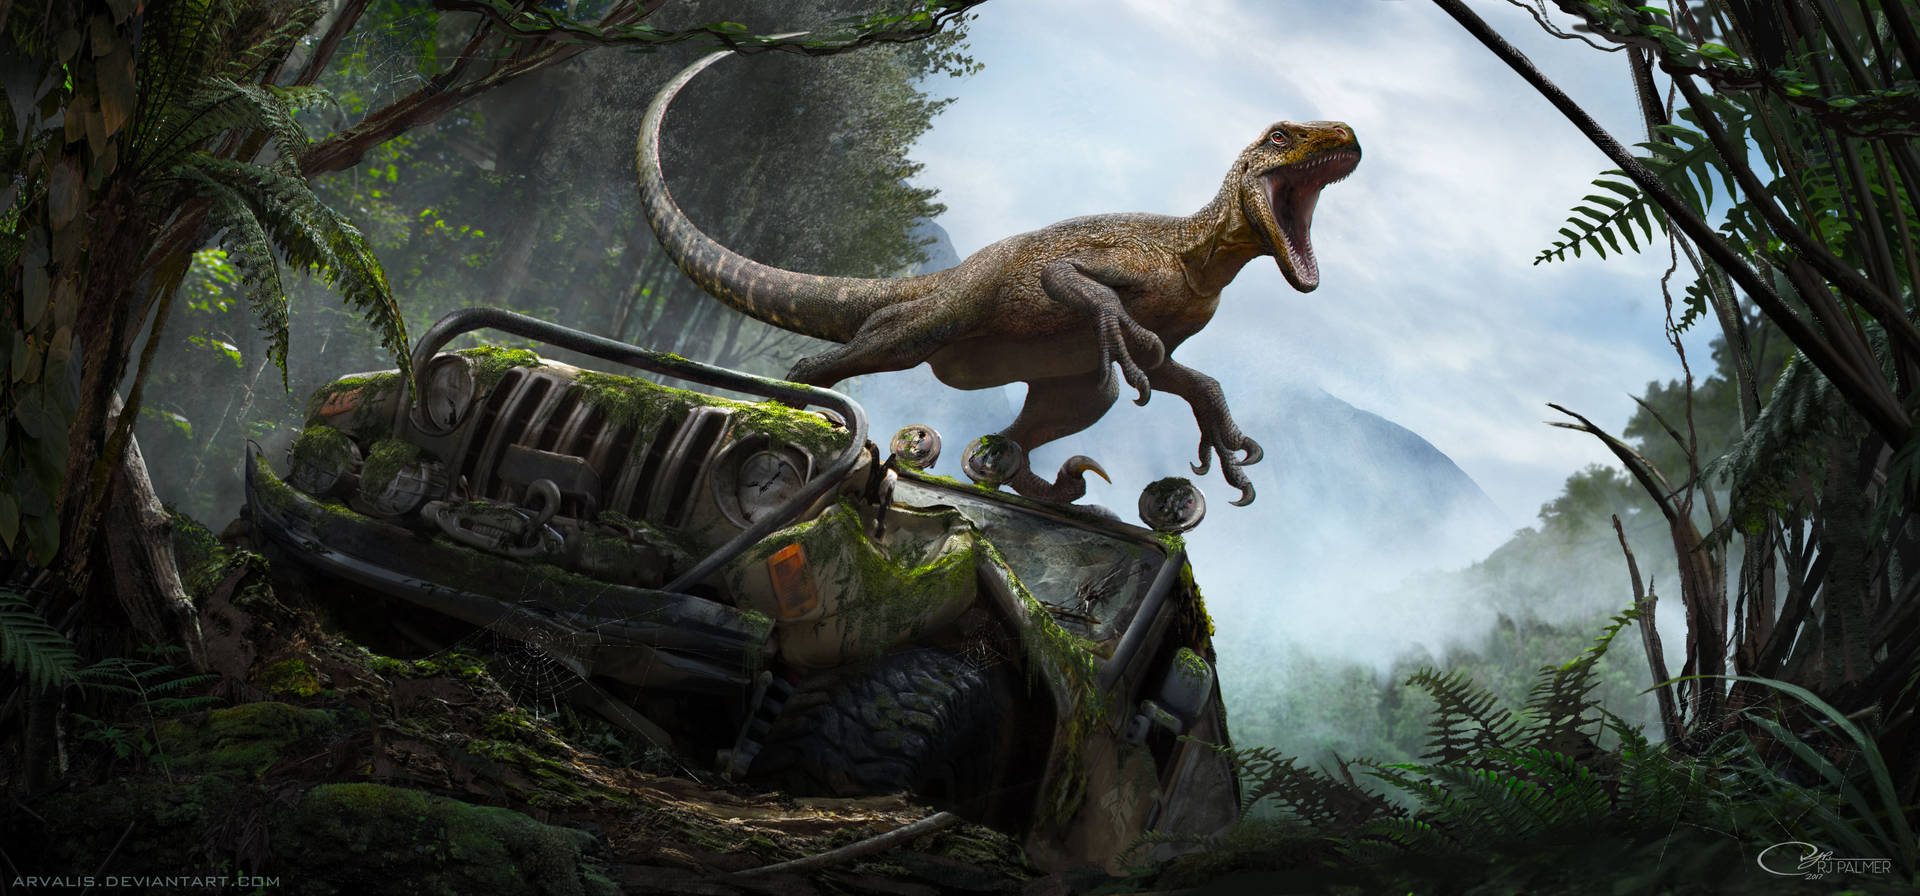 This raptor dinosaur is so awesome! Wallpaper